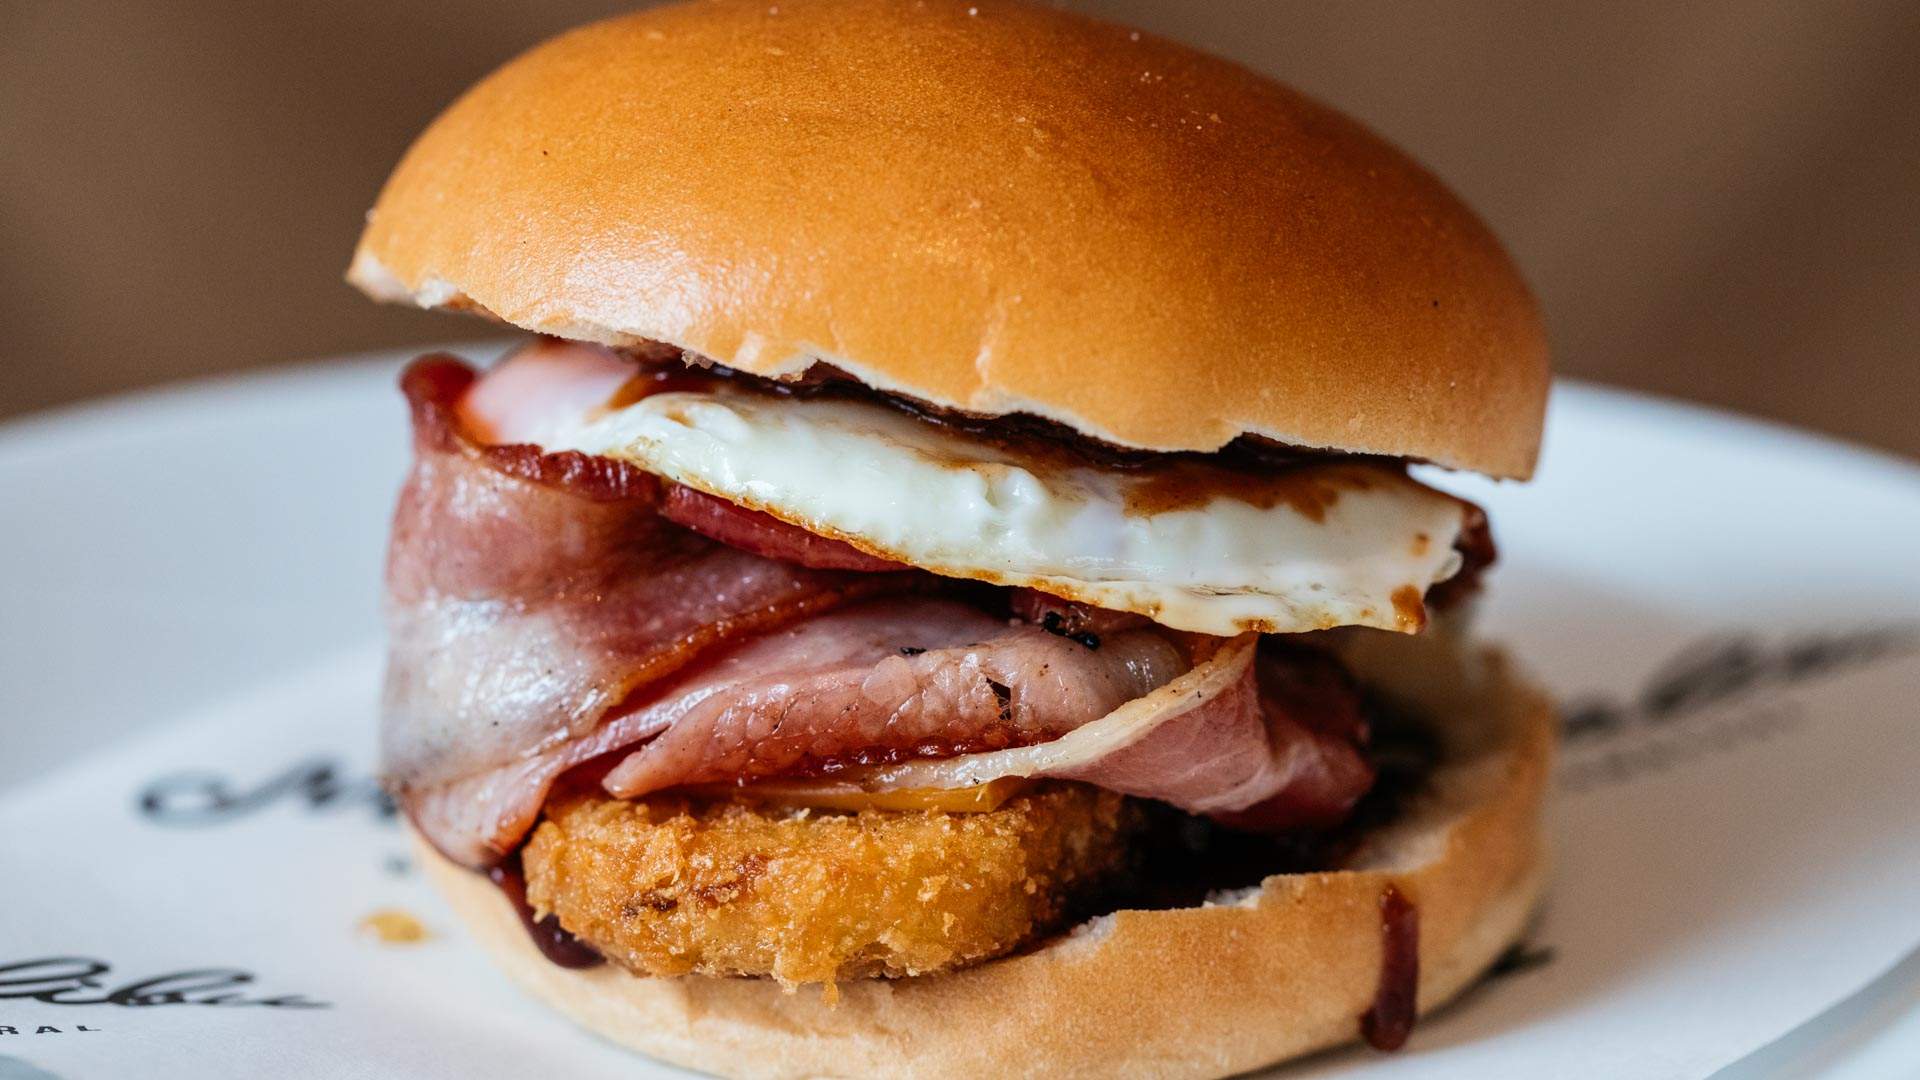 Egg and bacon roll from Malibu